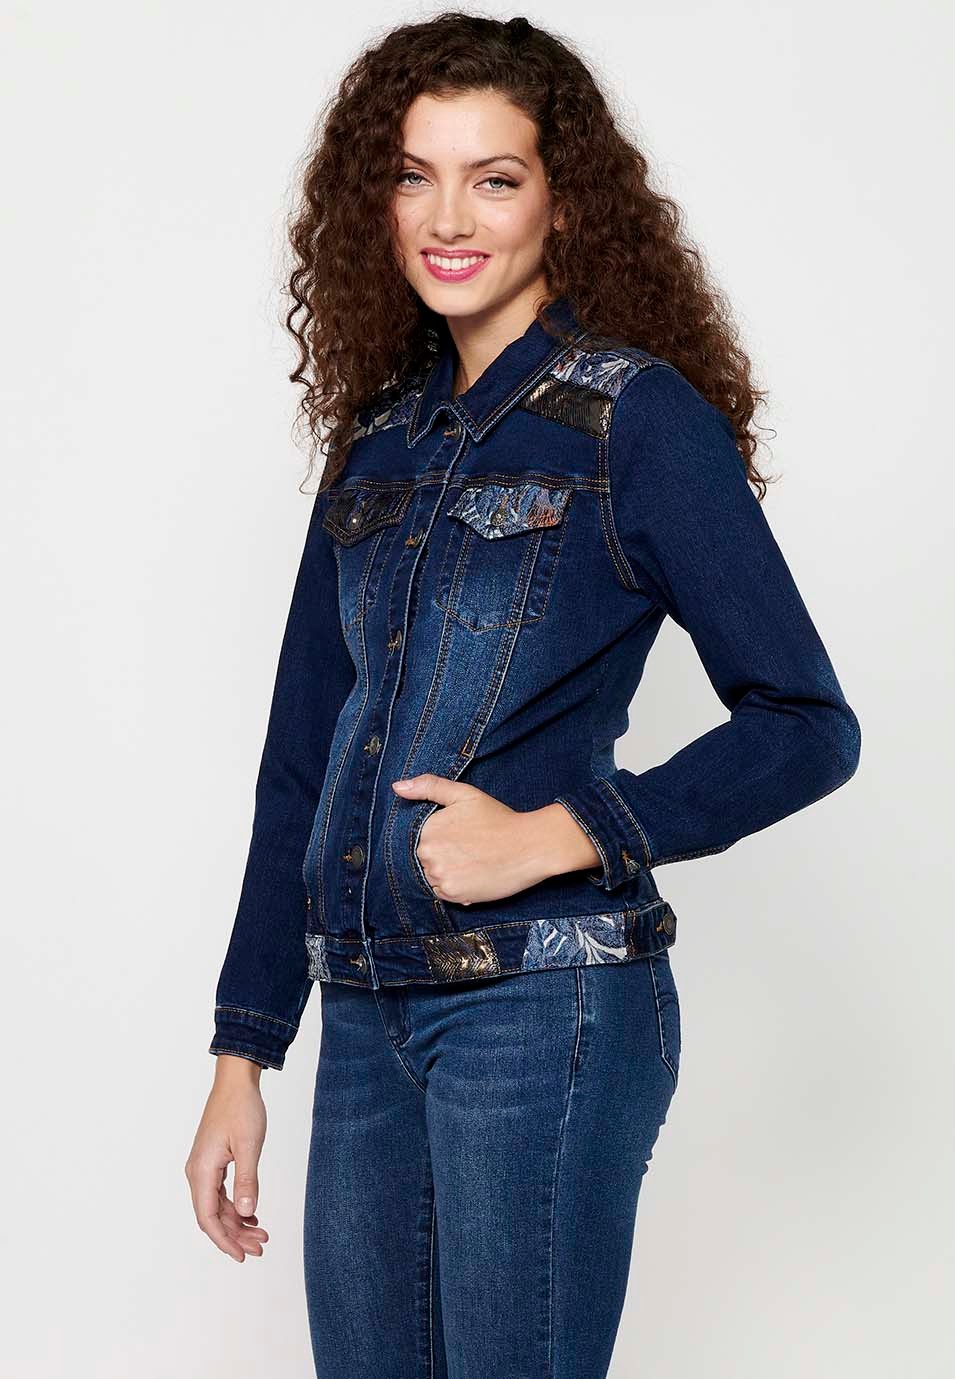 Dark Blue Long Sleeve Denim Jacket with Button Front Closure and Pockets with Embroidery on the Shoulders for Women 4